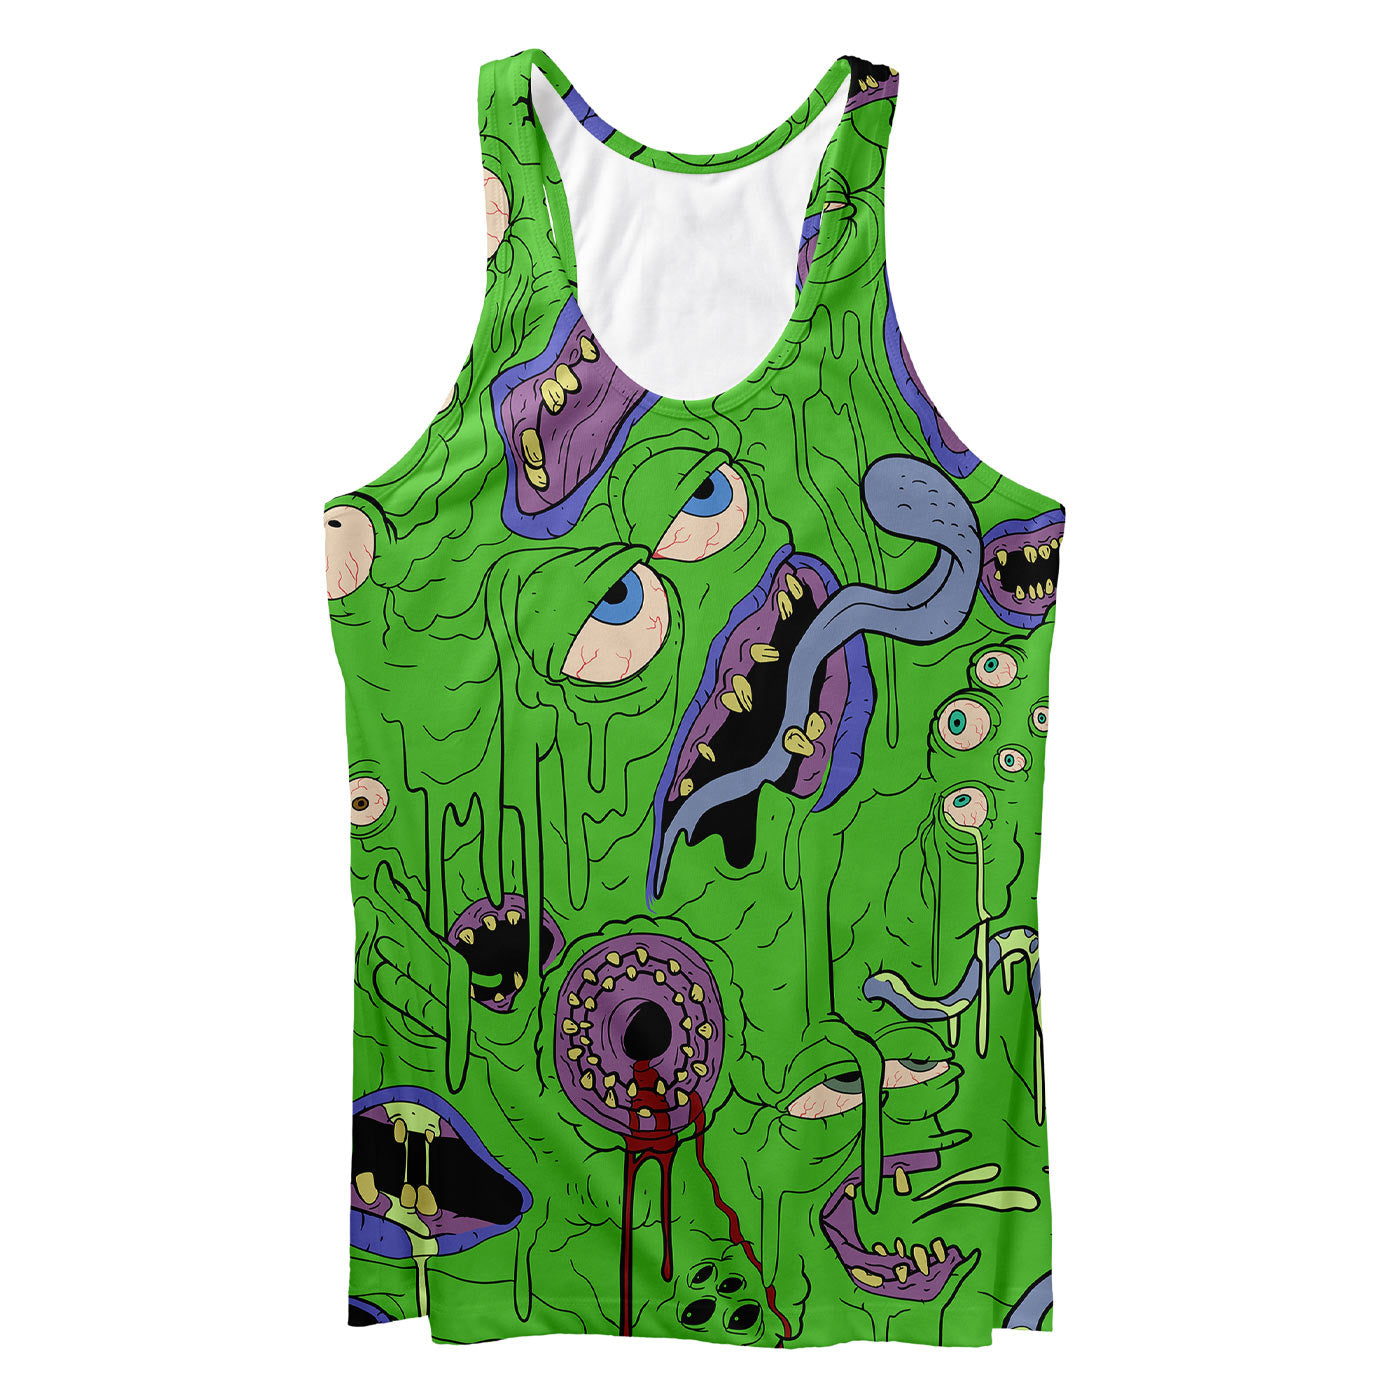 Melted Frog Tank Top